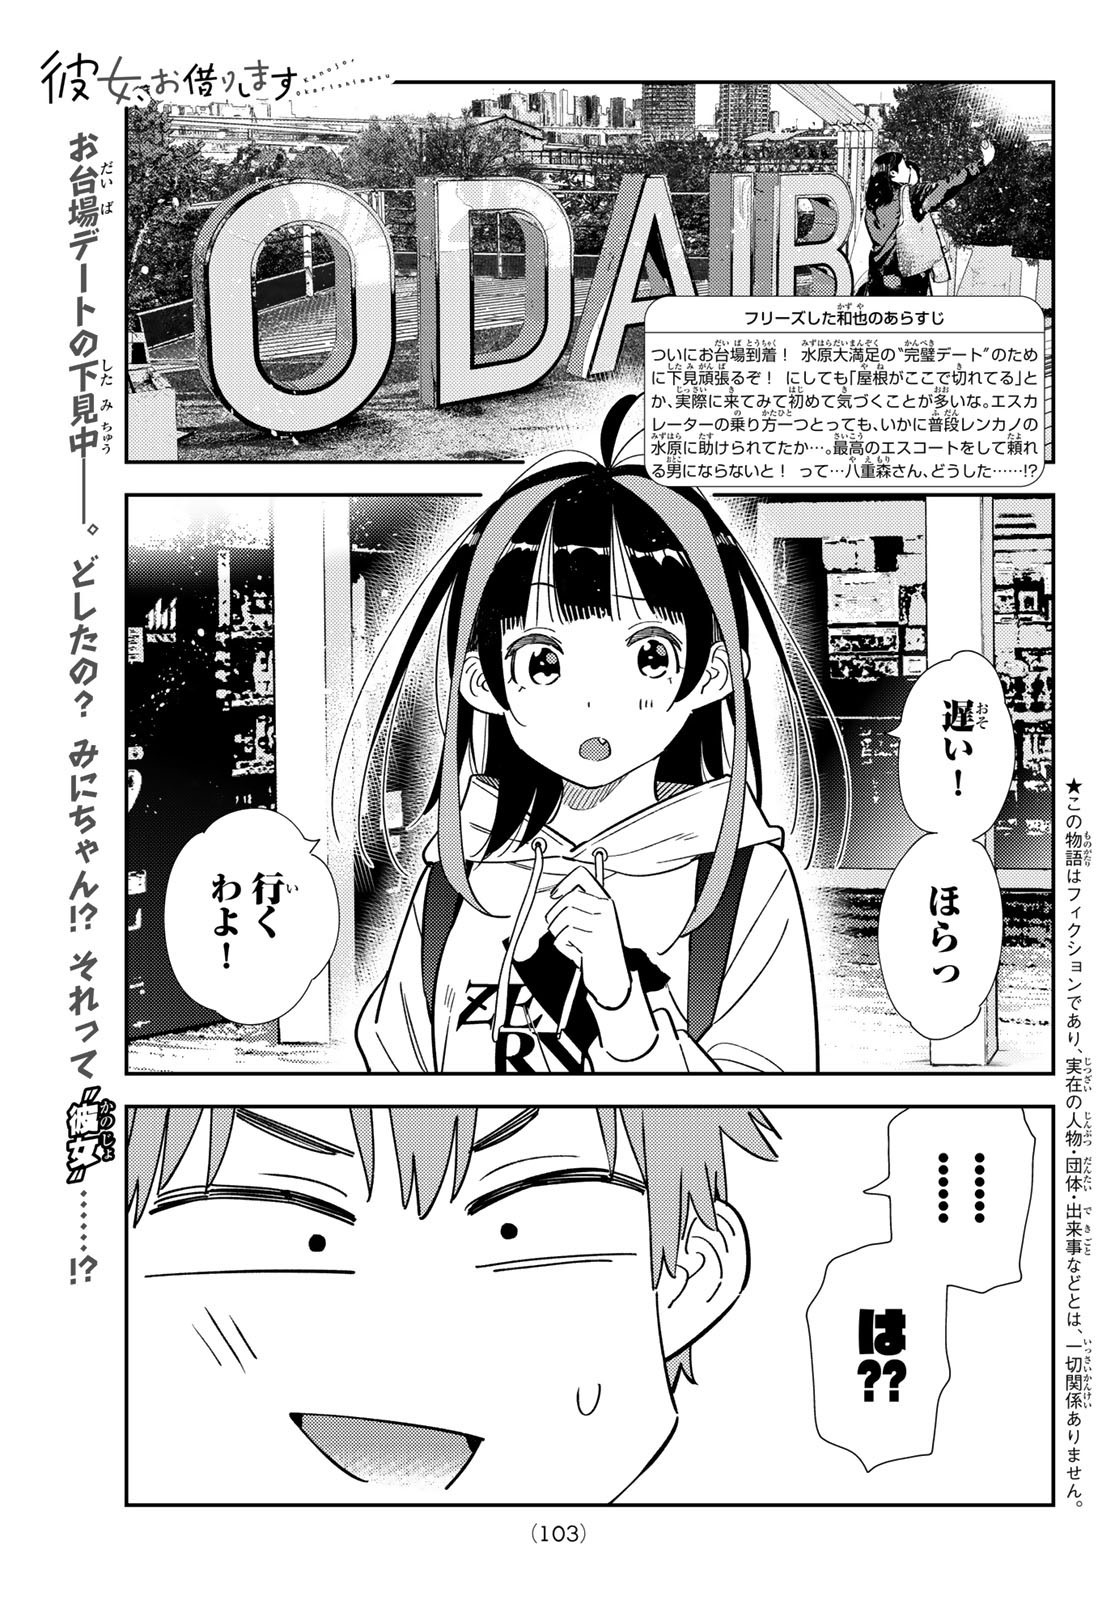 Weekly Shōnen Magazine - 週刊少年マガジン - Chapter 2024-28 - Page 100